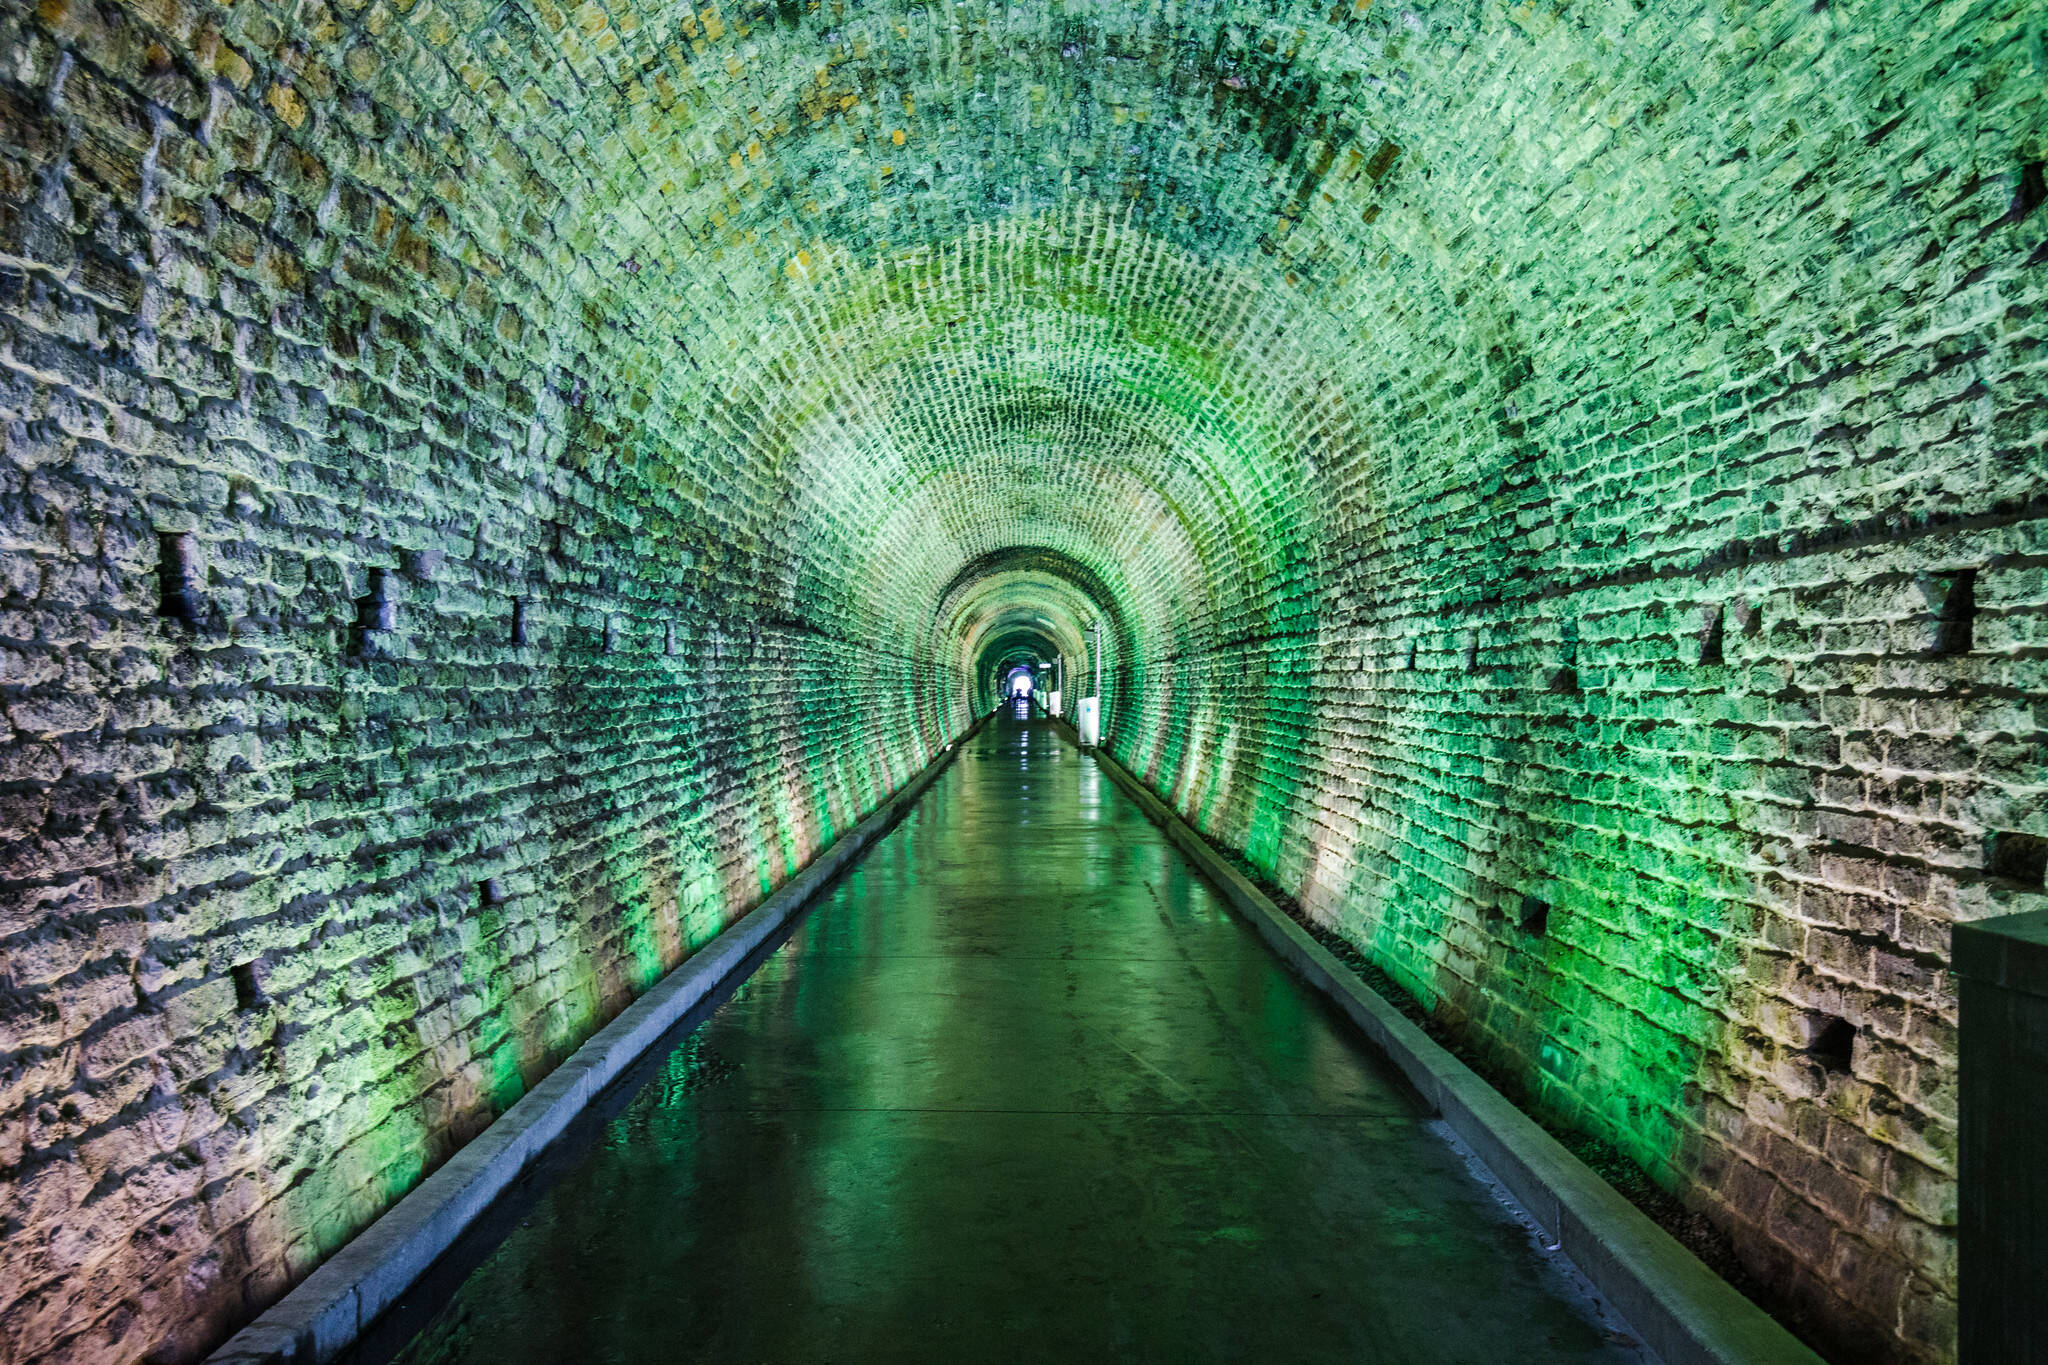 https://media.blogto.com/articles/20220515-glowing-tunnel.jpg?w=2048&cmd=resize_then_crop&height=1365&quality=70